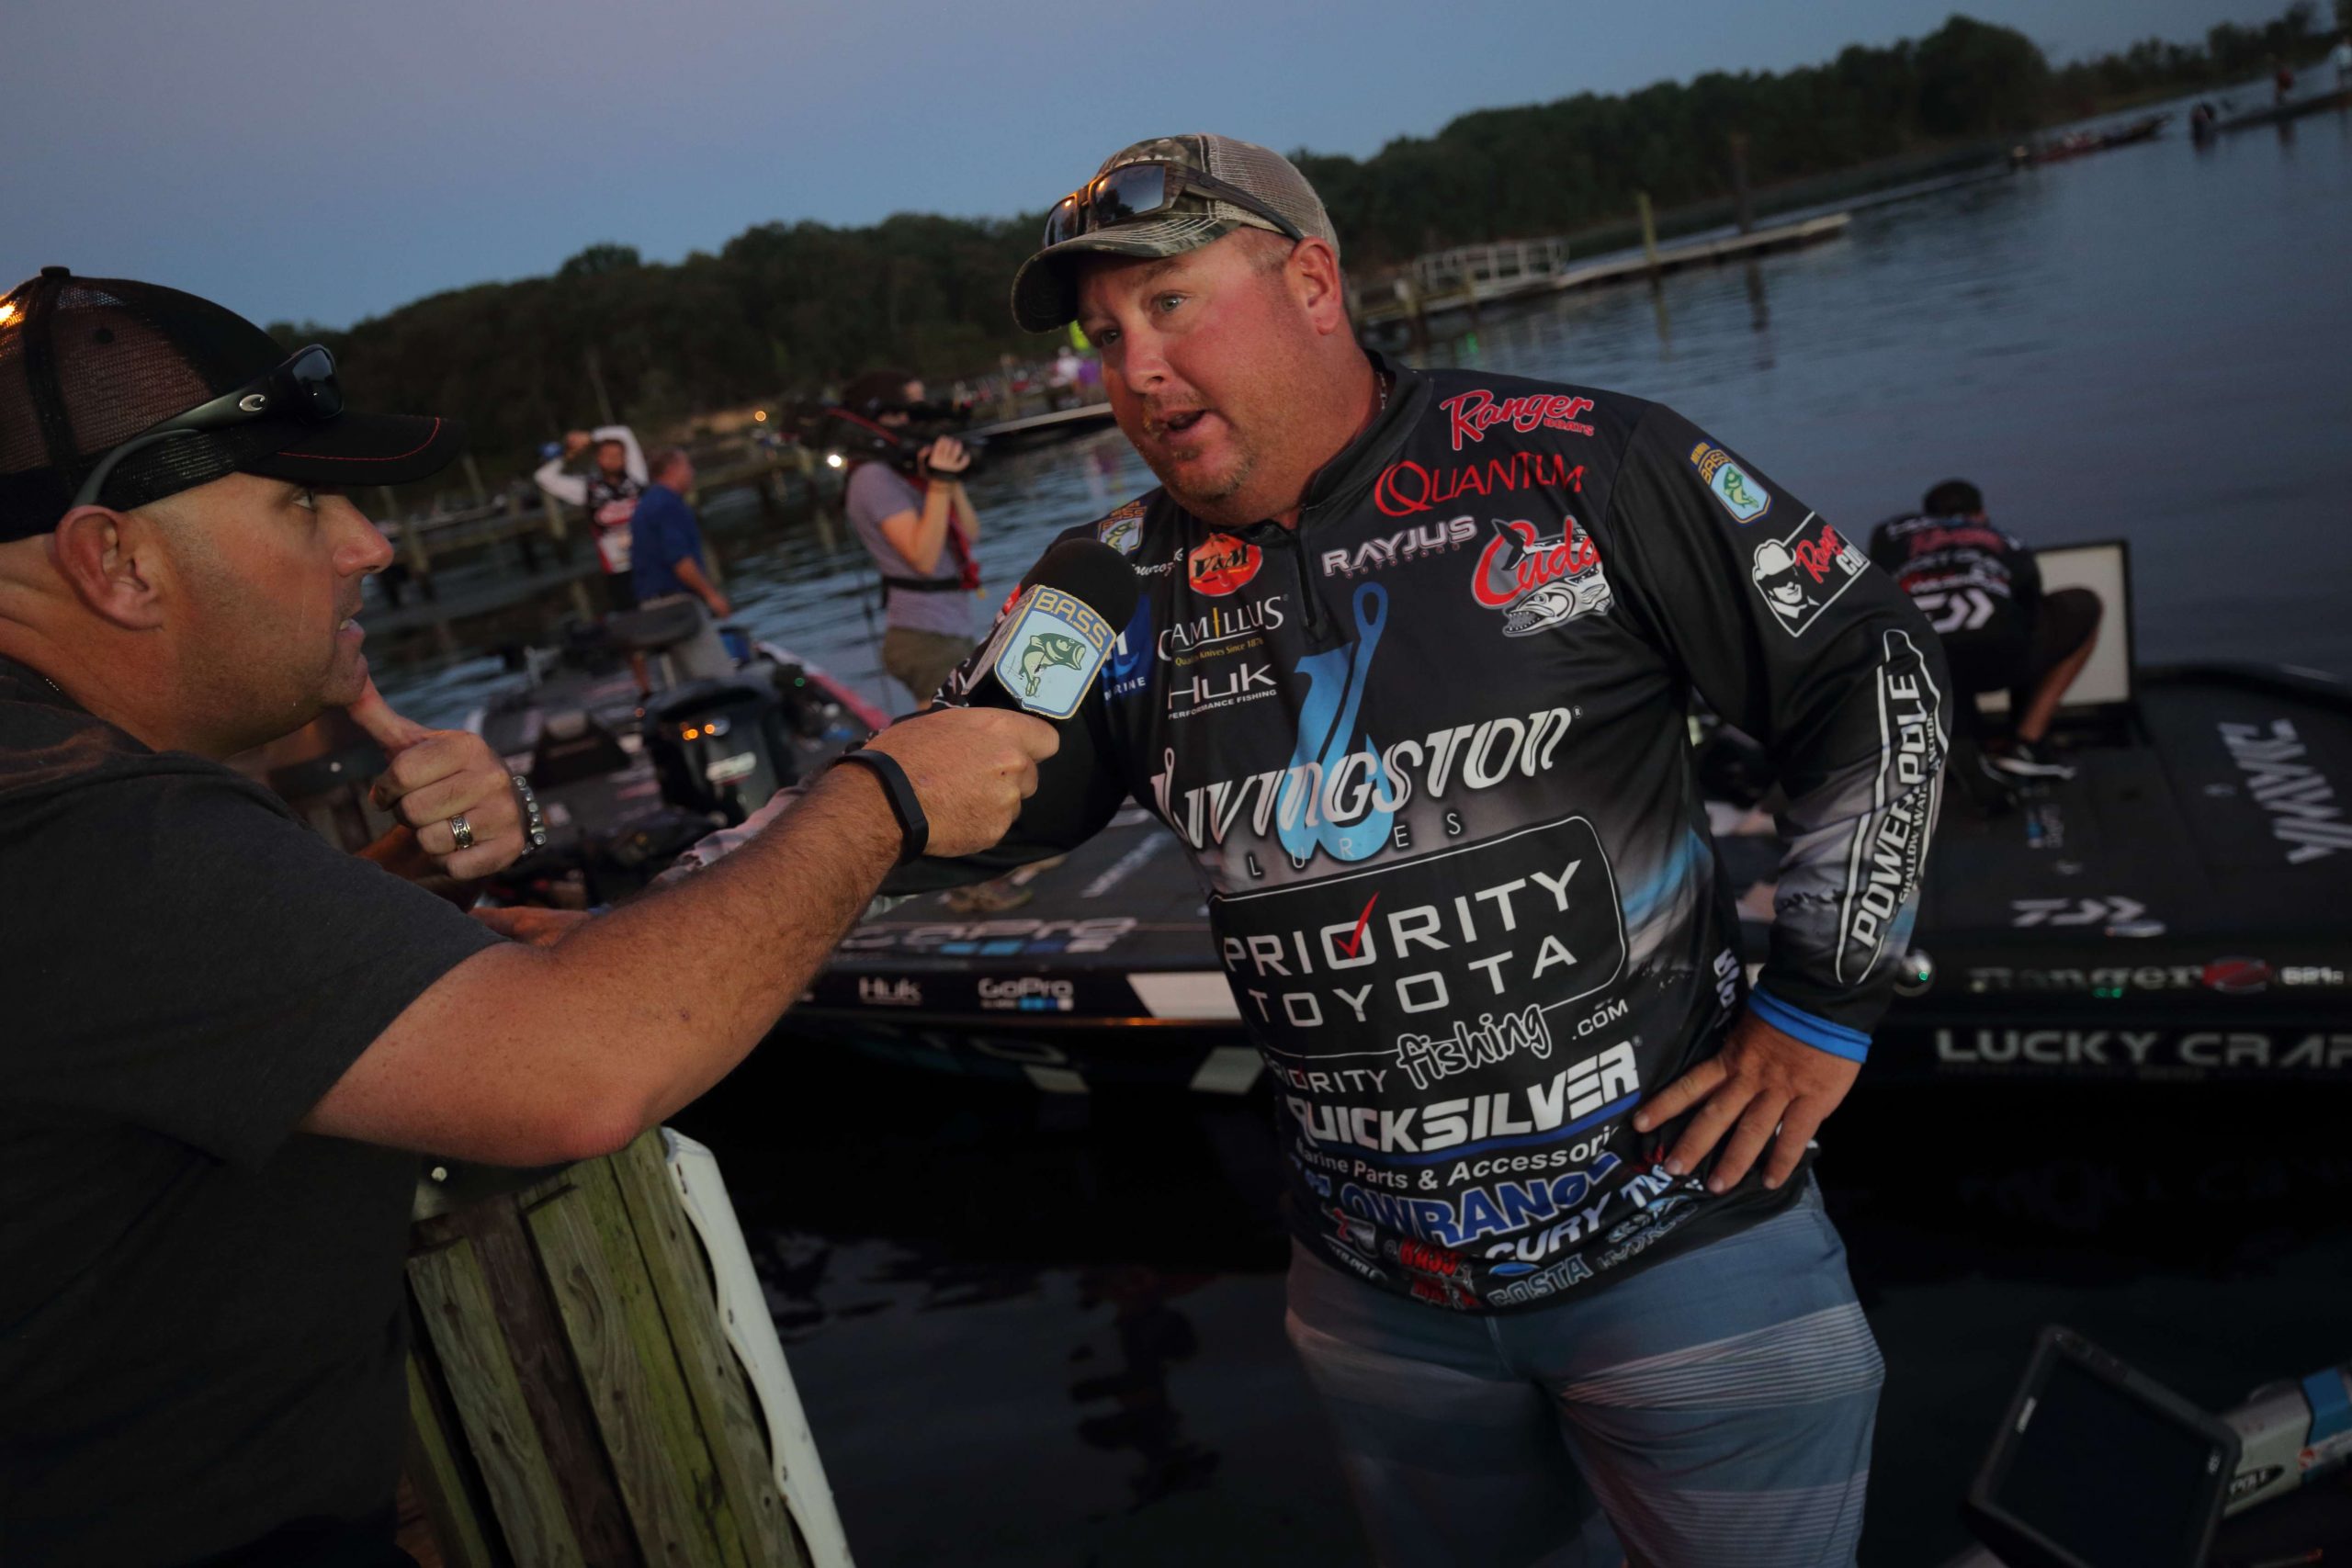 For Powroznik, who entered his first tournament when he was 10 years old, the best part about being a professional bass angler is meeting the fans. 